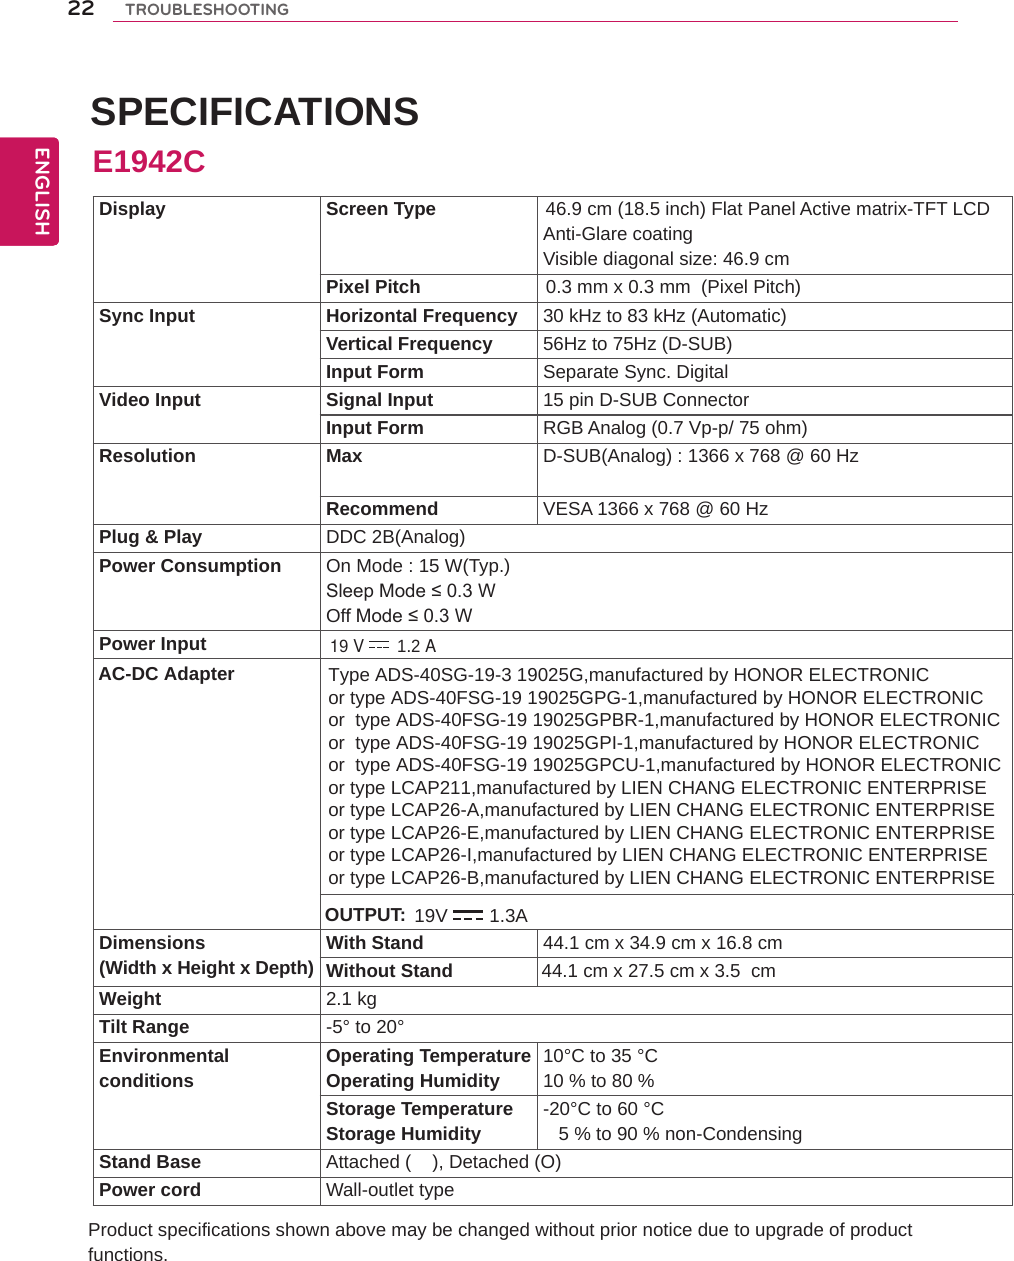  SPECIFICATIONS Product specifications shown above may be changed without prior notice due to upgrade of product functions.Display Screen Type                     46.9 cm (18.5 inch) Flat Panel Active matrix-TFT LCDAnti-Glare coatingVisible diagonal size: 46.9 cmPixel Pitch                        0.3 mm x 0.3 mm  (Pixel Pitch)Sync Input Horizontal Frequency 30 kHz to 83 kHz (Automatic)Vertical Frequency 56Hz to 75Hz (D-SUB)Input Form Separate Sync. DigitalVideo Input Signal Input 15 pin D-SUB ConnectorInput Form RGB Analog (0.7 Vp-p/ 75 ohm)Resolution Max D-SUB(Analog) : 1366 x 768 @ 60 HzRecommend VESA 1366 x 768 @ 60 HzPlug &amp; Play DDC 2B(Analog)Power Consumption On Mode : 15 W(Typ.)Sleep Mode ≤ 0.3 W Off Mode ≤ 0.3 W Power InputDimensions(Width x Height x Depth) With Stand 44.1 cm x 34.9 cm x 16.8 cmWithout Stand                 44.1 cm x 27.5 cm x 3.5  cmWeight 2.1 kgTilt Range -5° to 20°Environmentalconditions Operating TemperatureOperating Humidity 10°C to 35 °C10 % to 80 % Storage TemperatureStorage Humidity -20°C to 60 °C   5 % to 90 % non-CondensingStand Base Attached (    ), Detached (O)Power cord Wall-outlet typeE1942C19 V 1.2 A AC-DC Adapter Type ADS-40SG-19-3 19025G,manufactured by HONOR ELECTRONICor type ADS-40FSG-19 19025GPG-1,manufactured by HONOR ELECTRONICor  type ADS-40FSG-19 19025GPBR-1,manufactured by HONOR ELECTRONICor  type ADS-40FSG-19 19025GPI-1,manufactured by HONOR ELECTRONICor  type ADS-40FSG-19 19025GPCU-1,manufactured by HONOR ELECTRONICor type LCAP211,manufactured by LIEN CHANG ELECTRONIC ENTERPRISEor type LCAP26-A,manufactured by LIEN CHANG ELECTRONIC ENTERPRISEor type LCAP26-E,manufactured by LIEN CHANG ELECTRONIC ENTERPRISEor type LCAP26-I,manufactured by LIEN CHANG ELECTRONIC ENTERPRISEor type LCAP26-B,manufactured by LIEN CHANG ELECTRONIC ENTERPRISE OUTPUT: 19V 1.3AENGENGLISH22 TROUBLESHOOTING